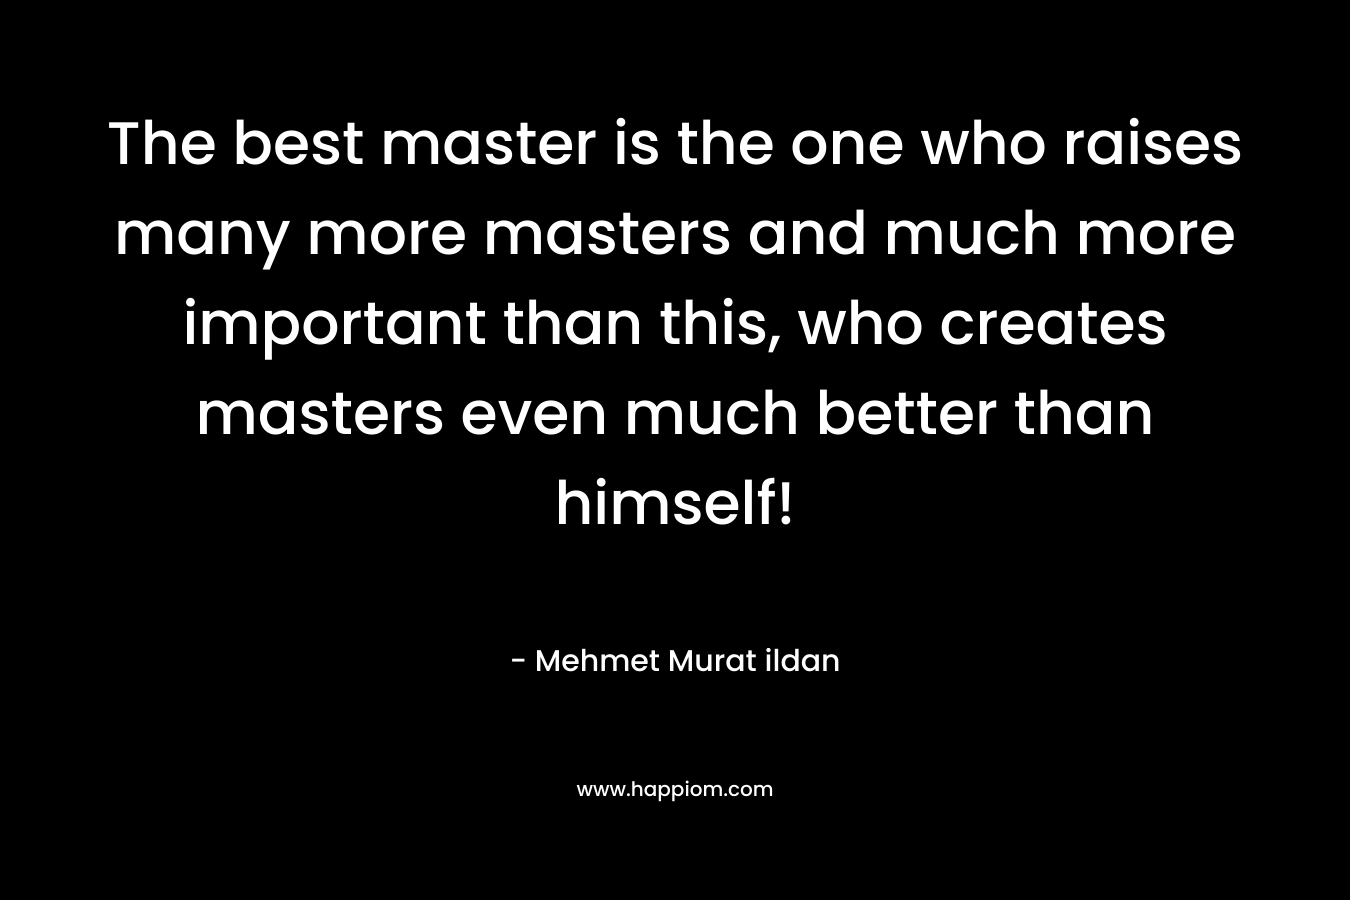 The best master is the one who raises many more masters and much more important than this, who creates masters even much better than himself! – Mehmet Murat ildan